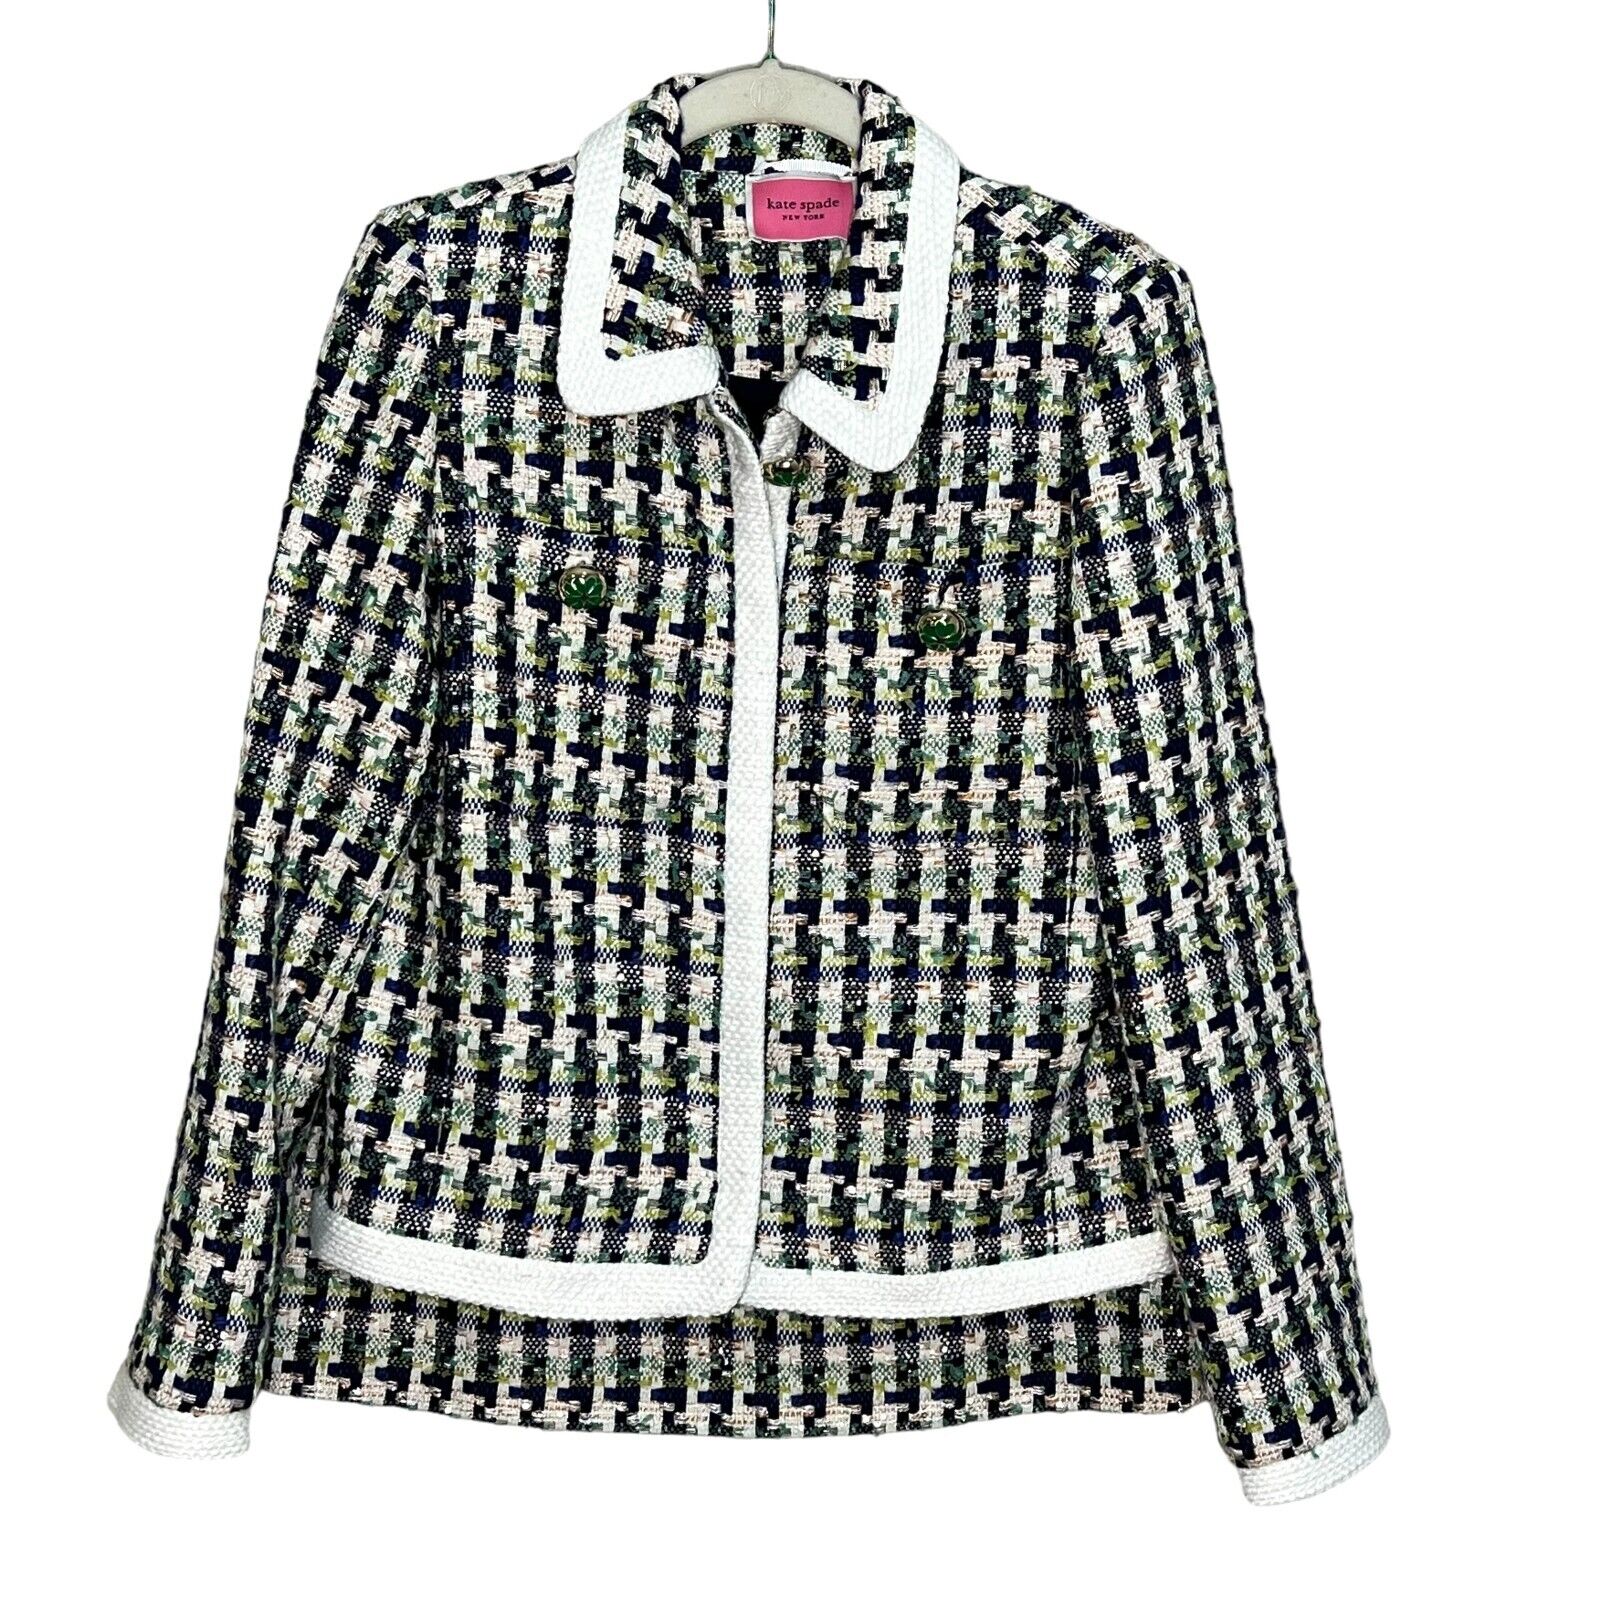 Kate Spade Cotton Pop Tweed Collared Jacket and Skirt Set Size 4